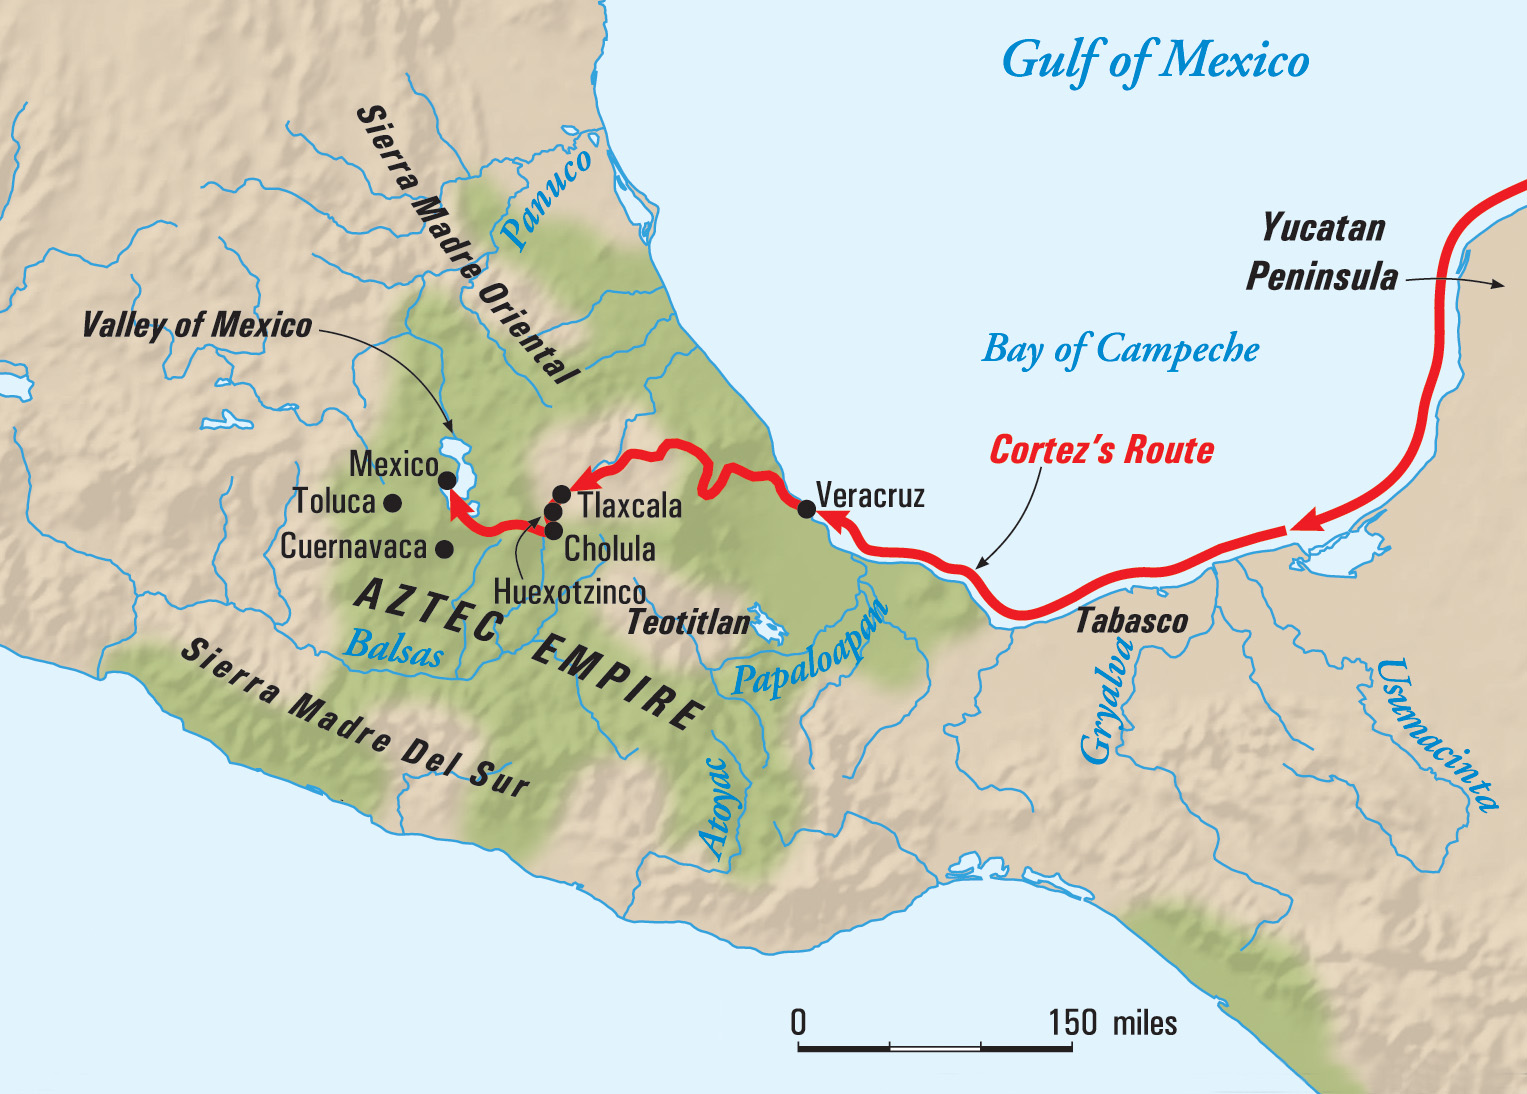 Cortes marched into the interior of Mexico in August 1519, trying on his long march to the Aztec capital of Tenochtitlan to use military force against the tribes he encountered only when necessary. 